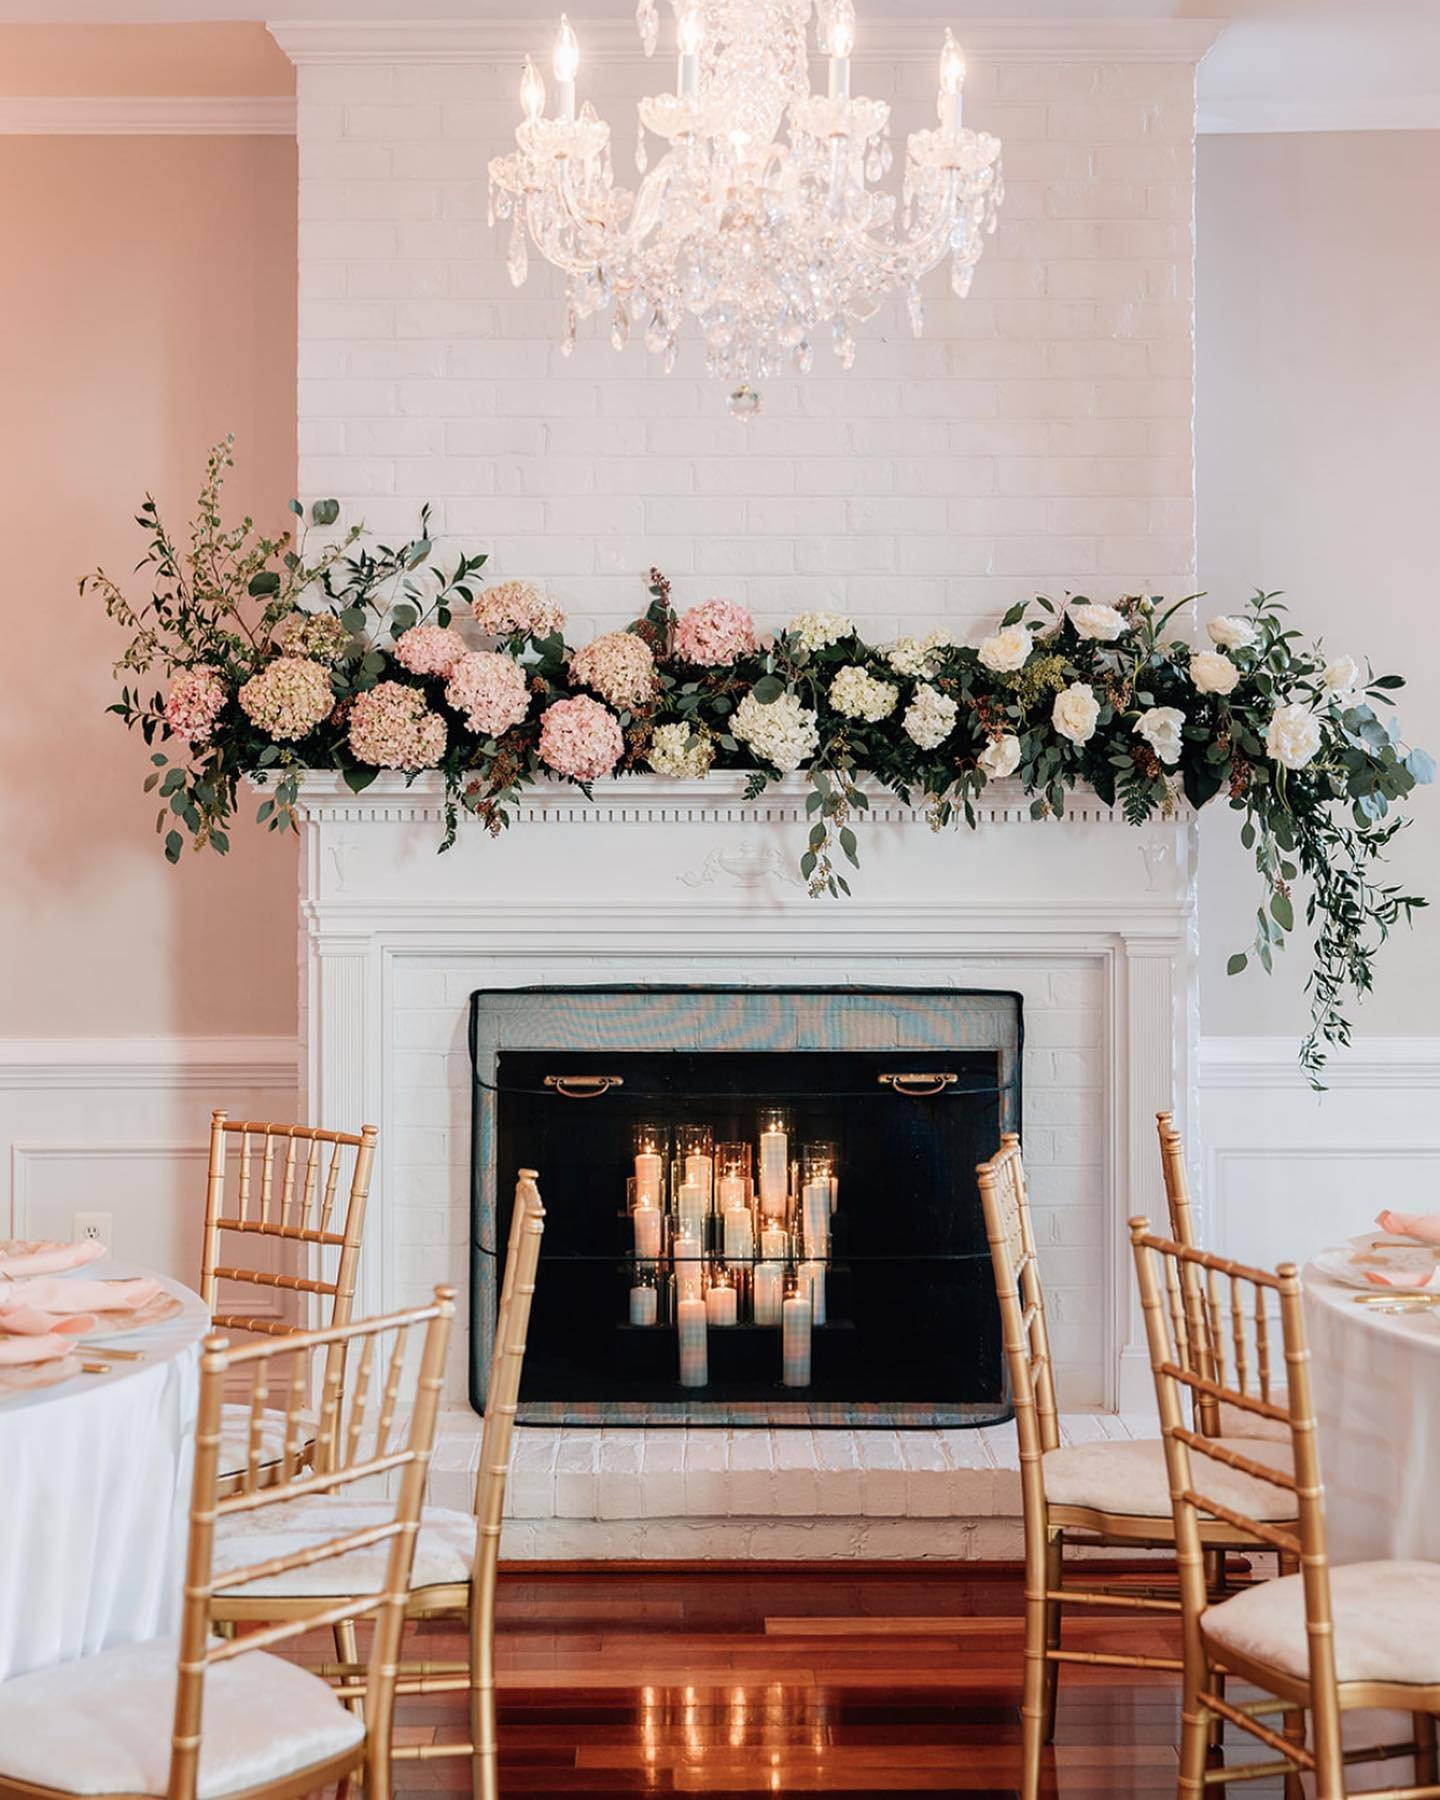 Fireplace wedding florals for Ally and Brandon this weekend 😍 so grateful for the opportunity to be a part of their day!
Photo @jessiesmith220 Planning @bestwishesloudoun